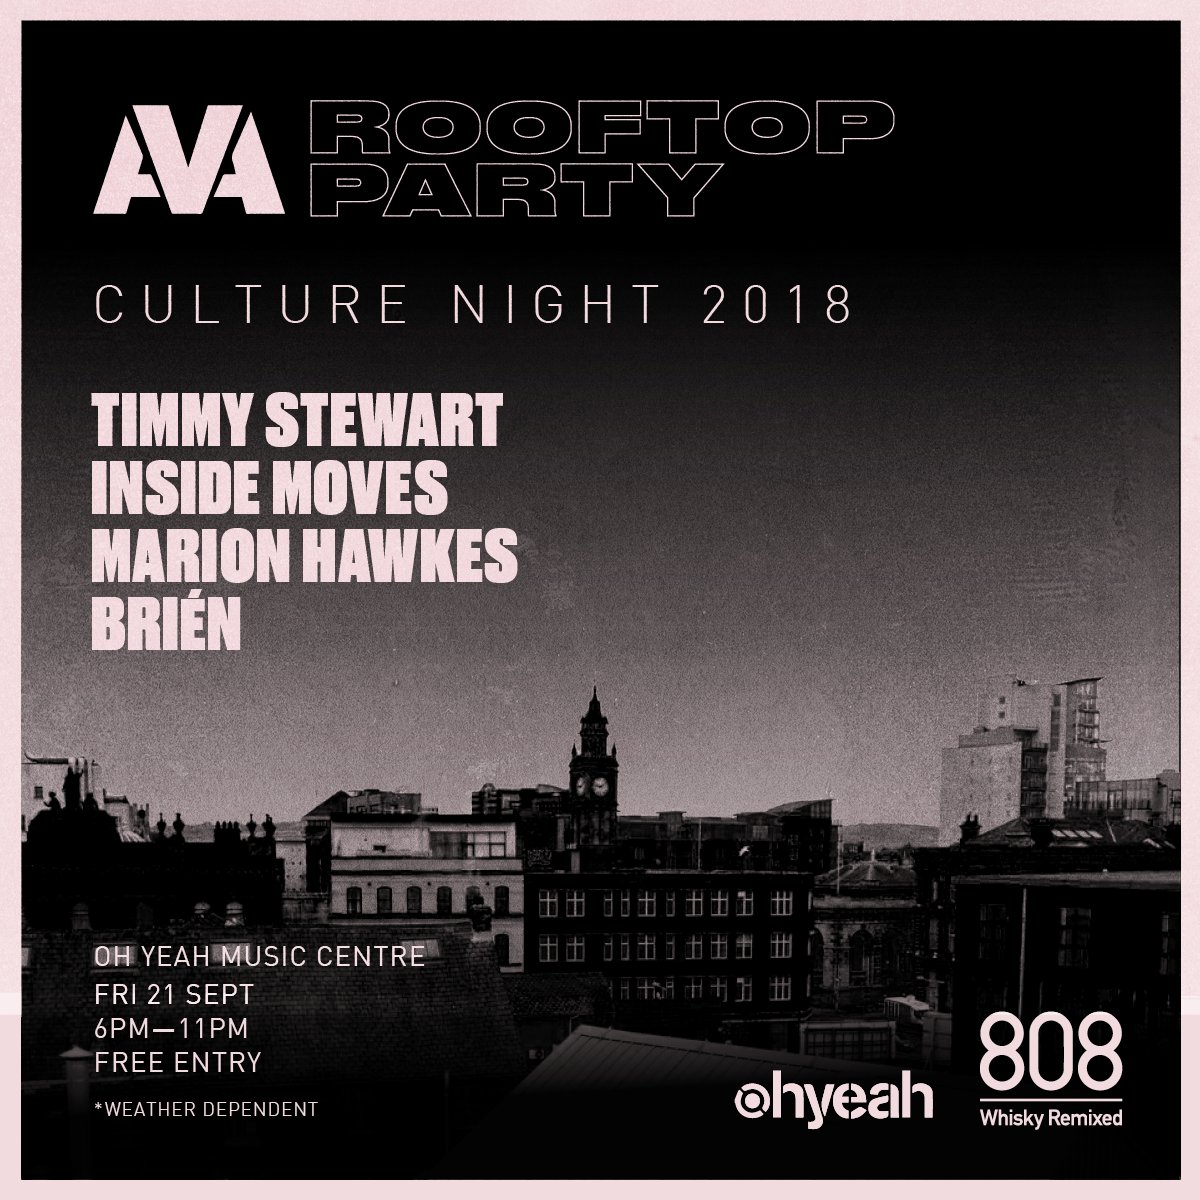 Can't wait for @AVAFestivalNI rooftop party at @OhYeahCentre Yeah in #Belfast tonight! @MrTimmyStewart, Inside Moves, Marion Hawkes & Brién lined up as part of @CultureNightBel. We got the whisky covered. #8O8 #WhiskyRemixed #NIMusic